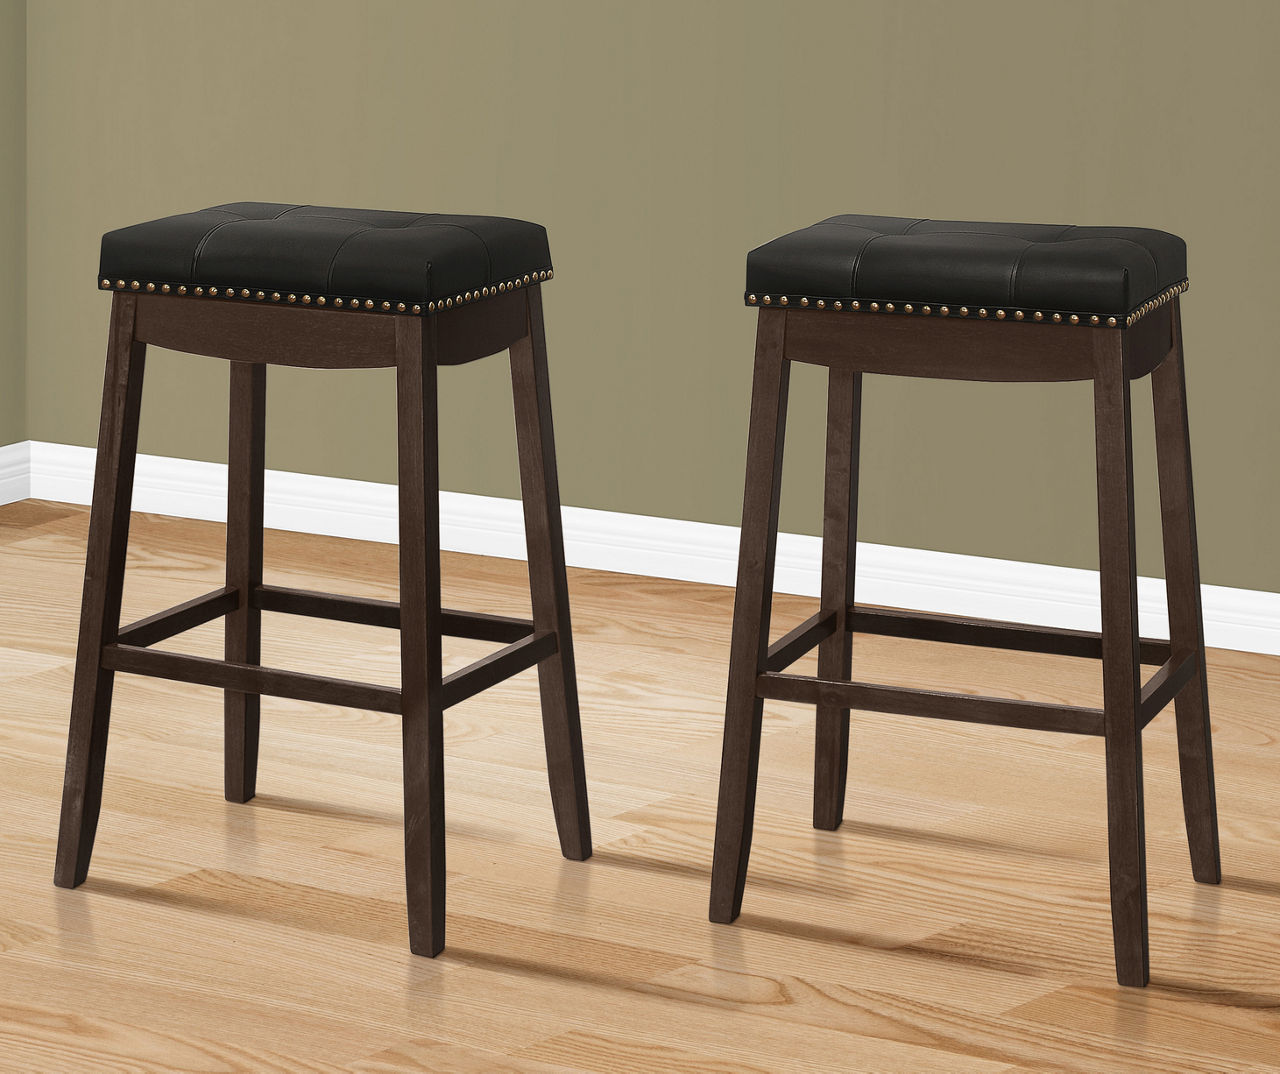 29.5" Black & Espresso Tufted Nailhead Faux Leather Counter Stools, 2-Pack